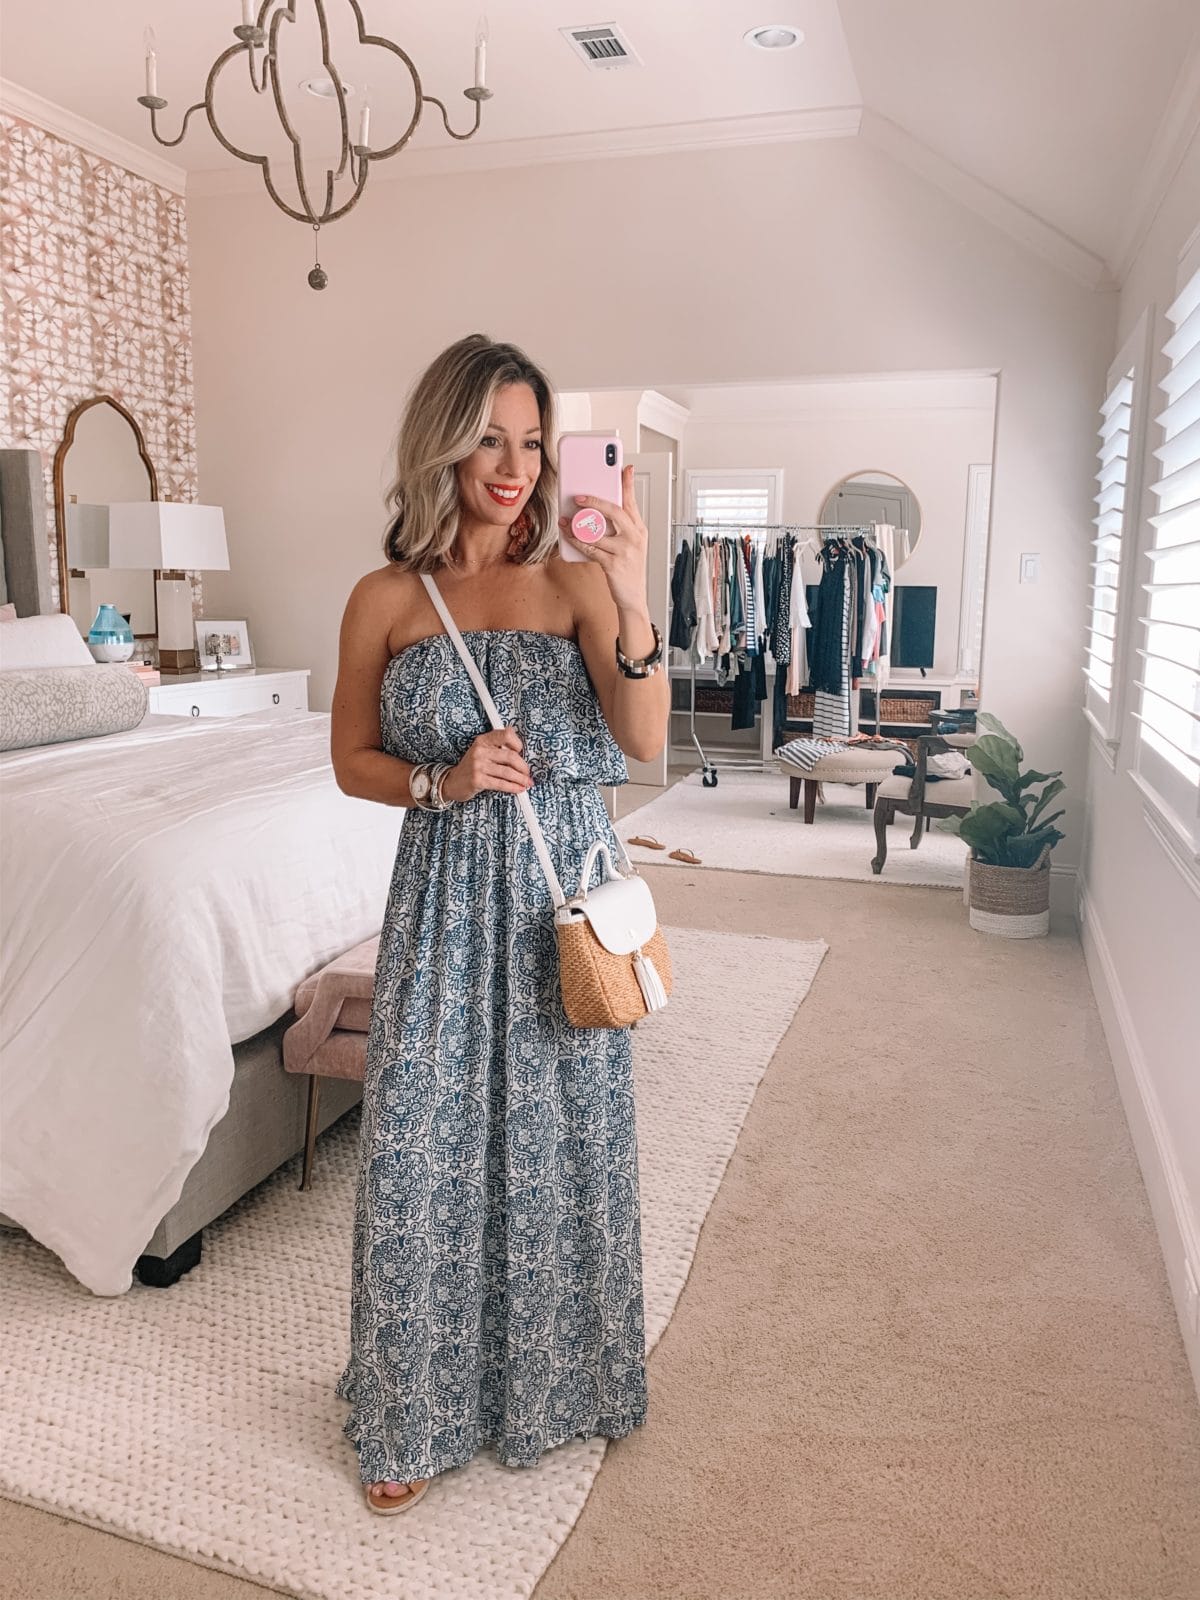 Off Shoulder Blue and White maxi Dress, Woven Crossbody